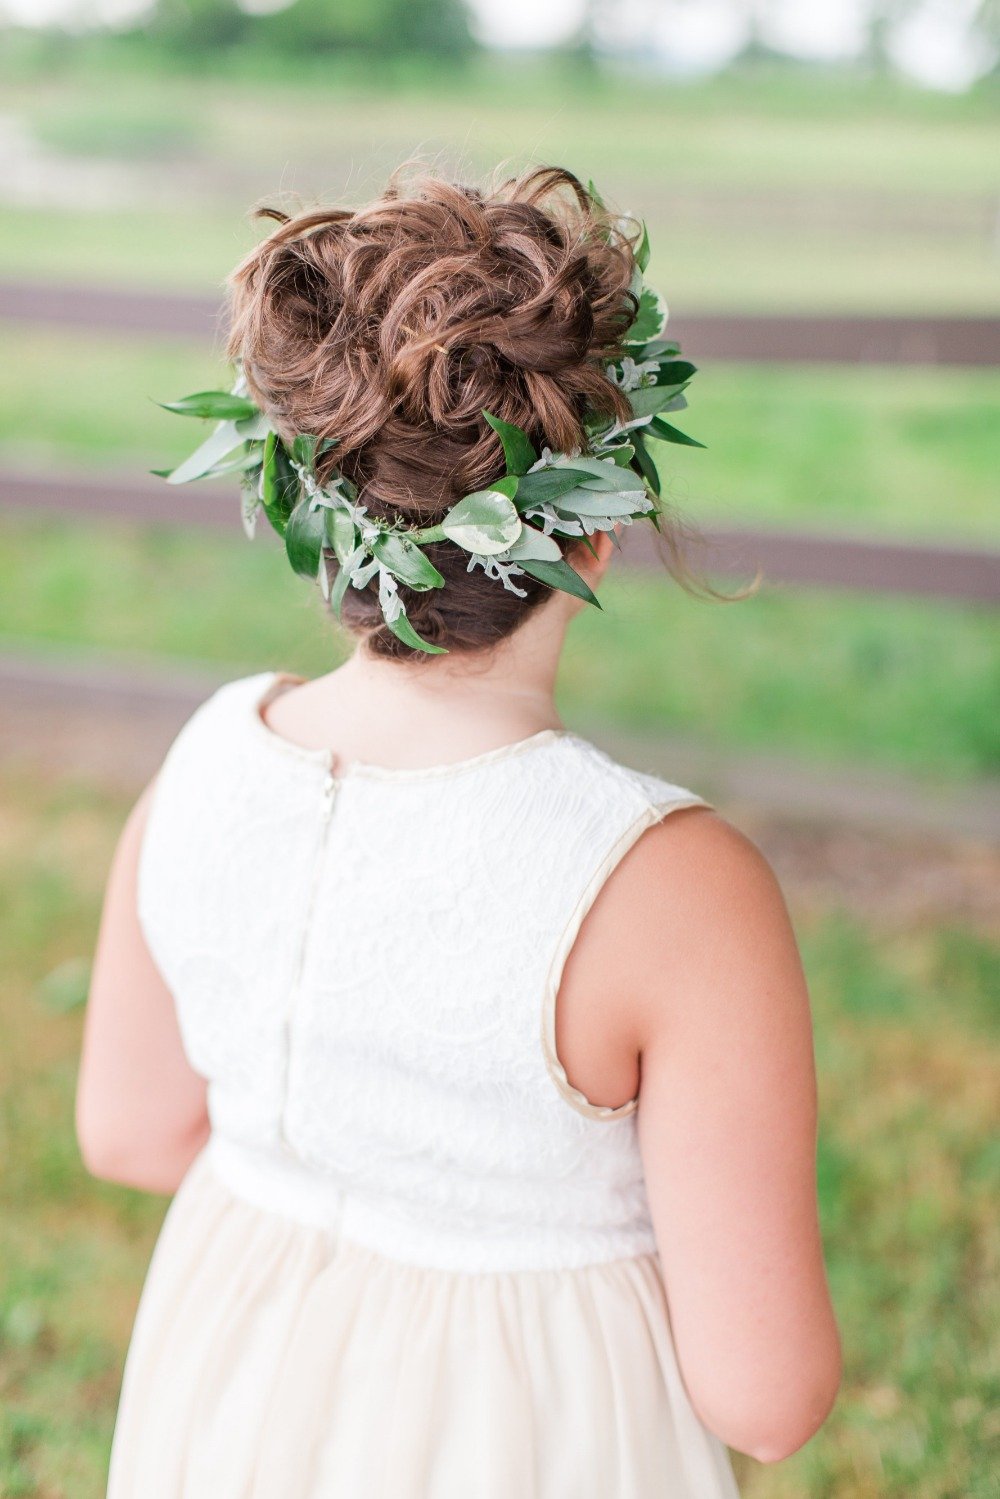 Flower girl crown and hair